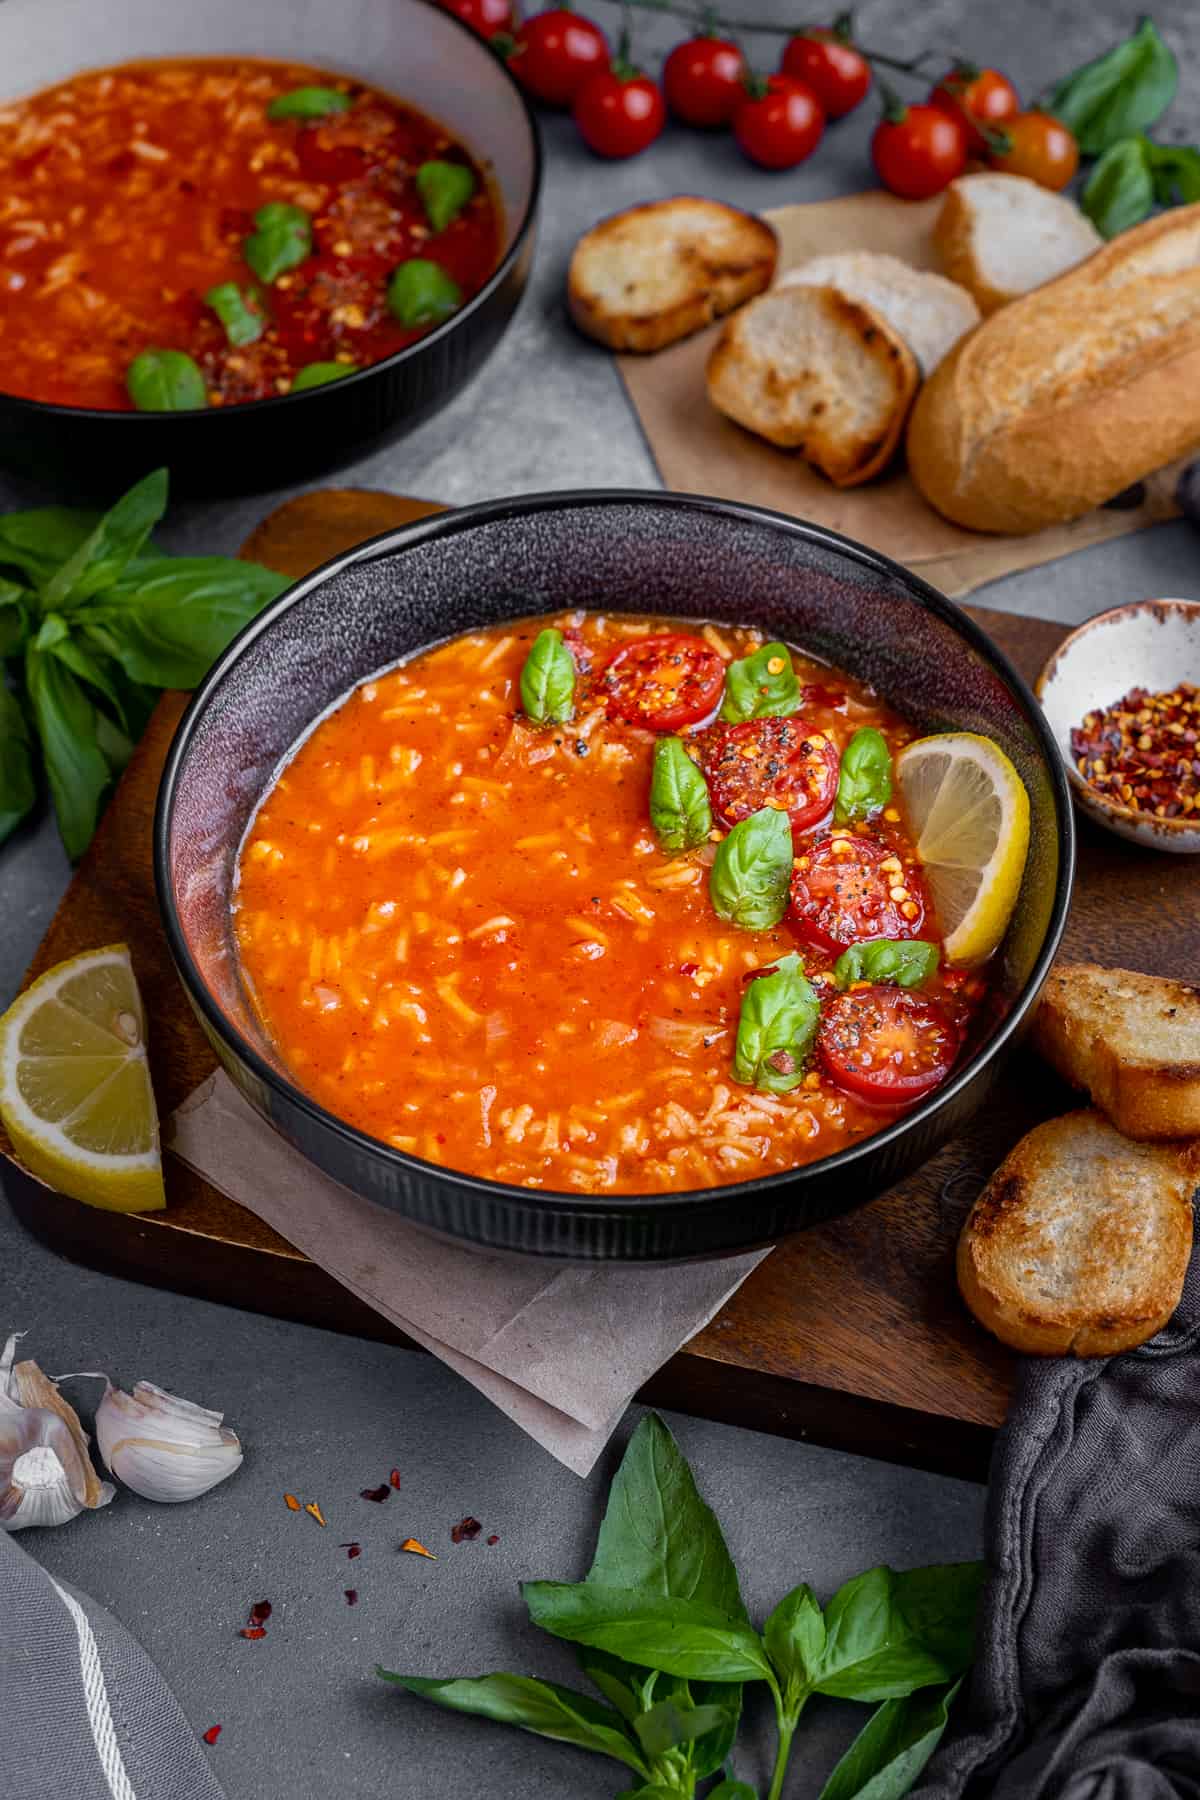 Tomato rice soup served in a black bowl, topped with fresh basil leaves, halved cherry tomatoes and a slice of lemon.